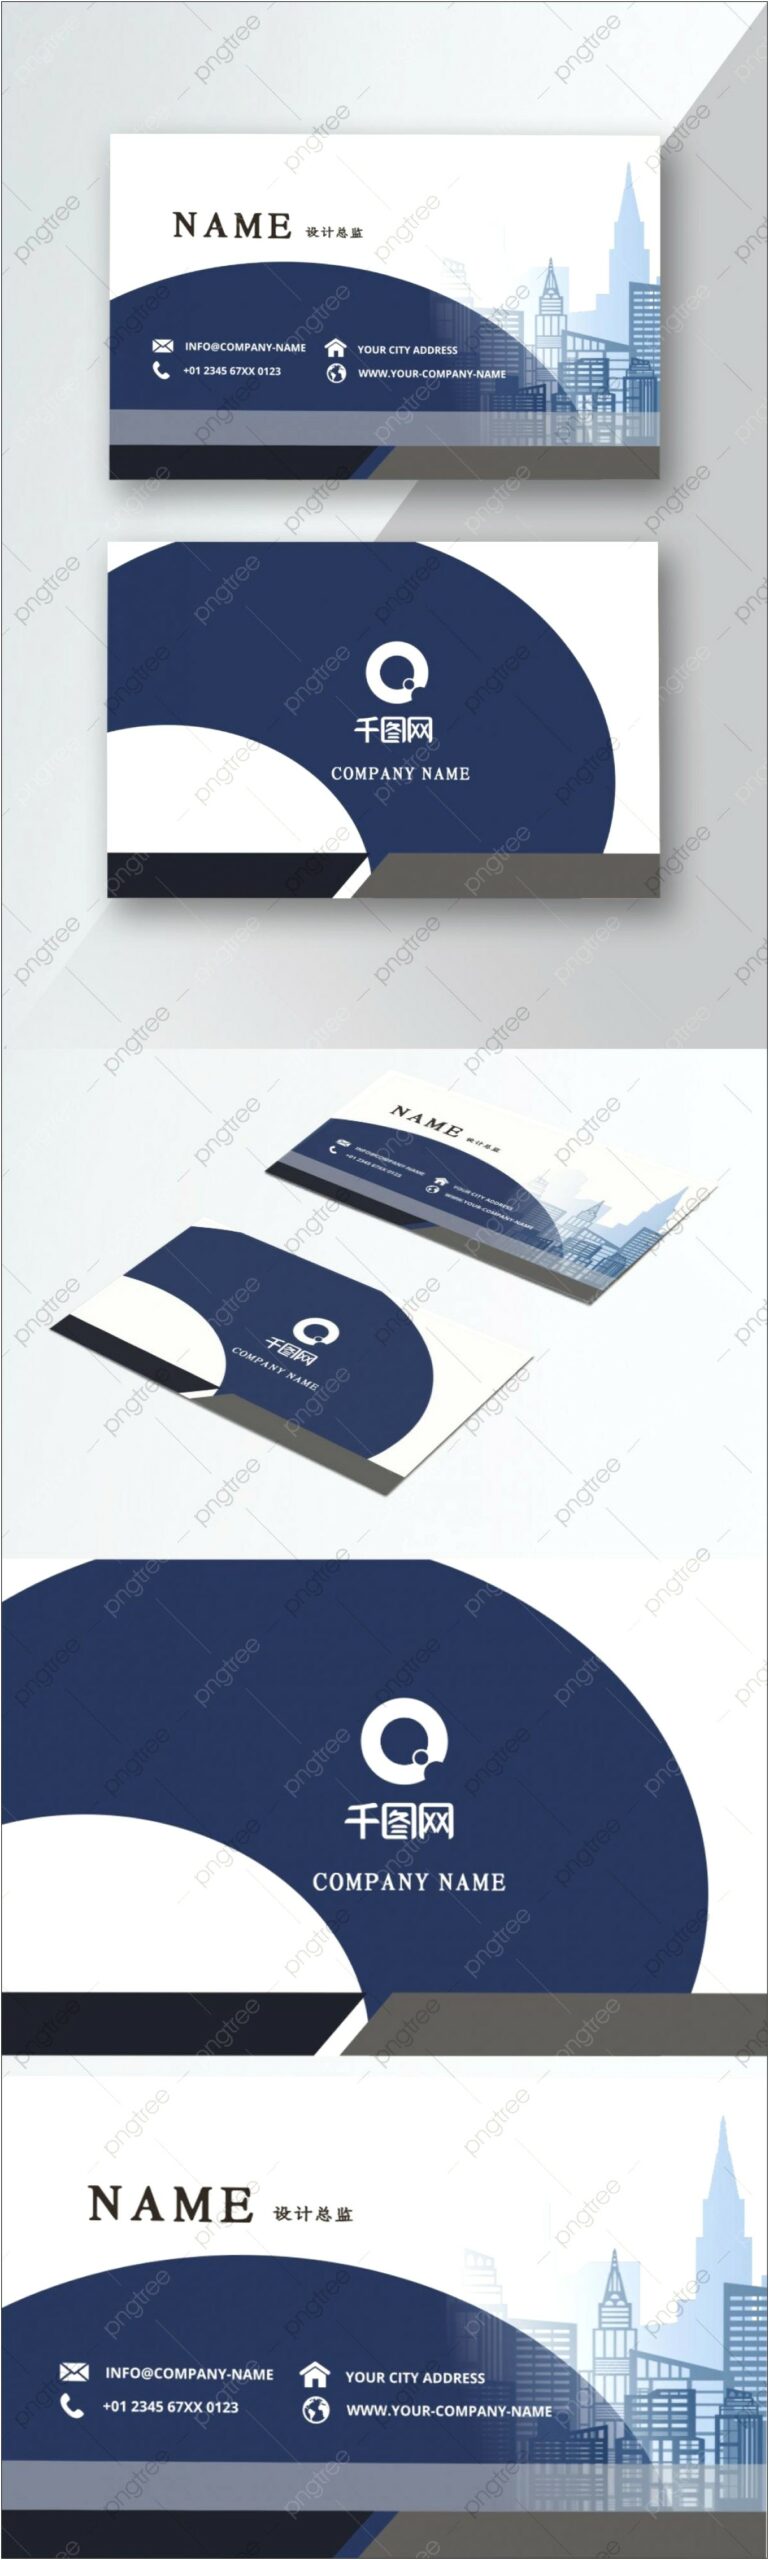 Illustration Real Estate Business Cards Templates Free